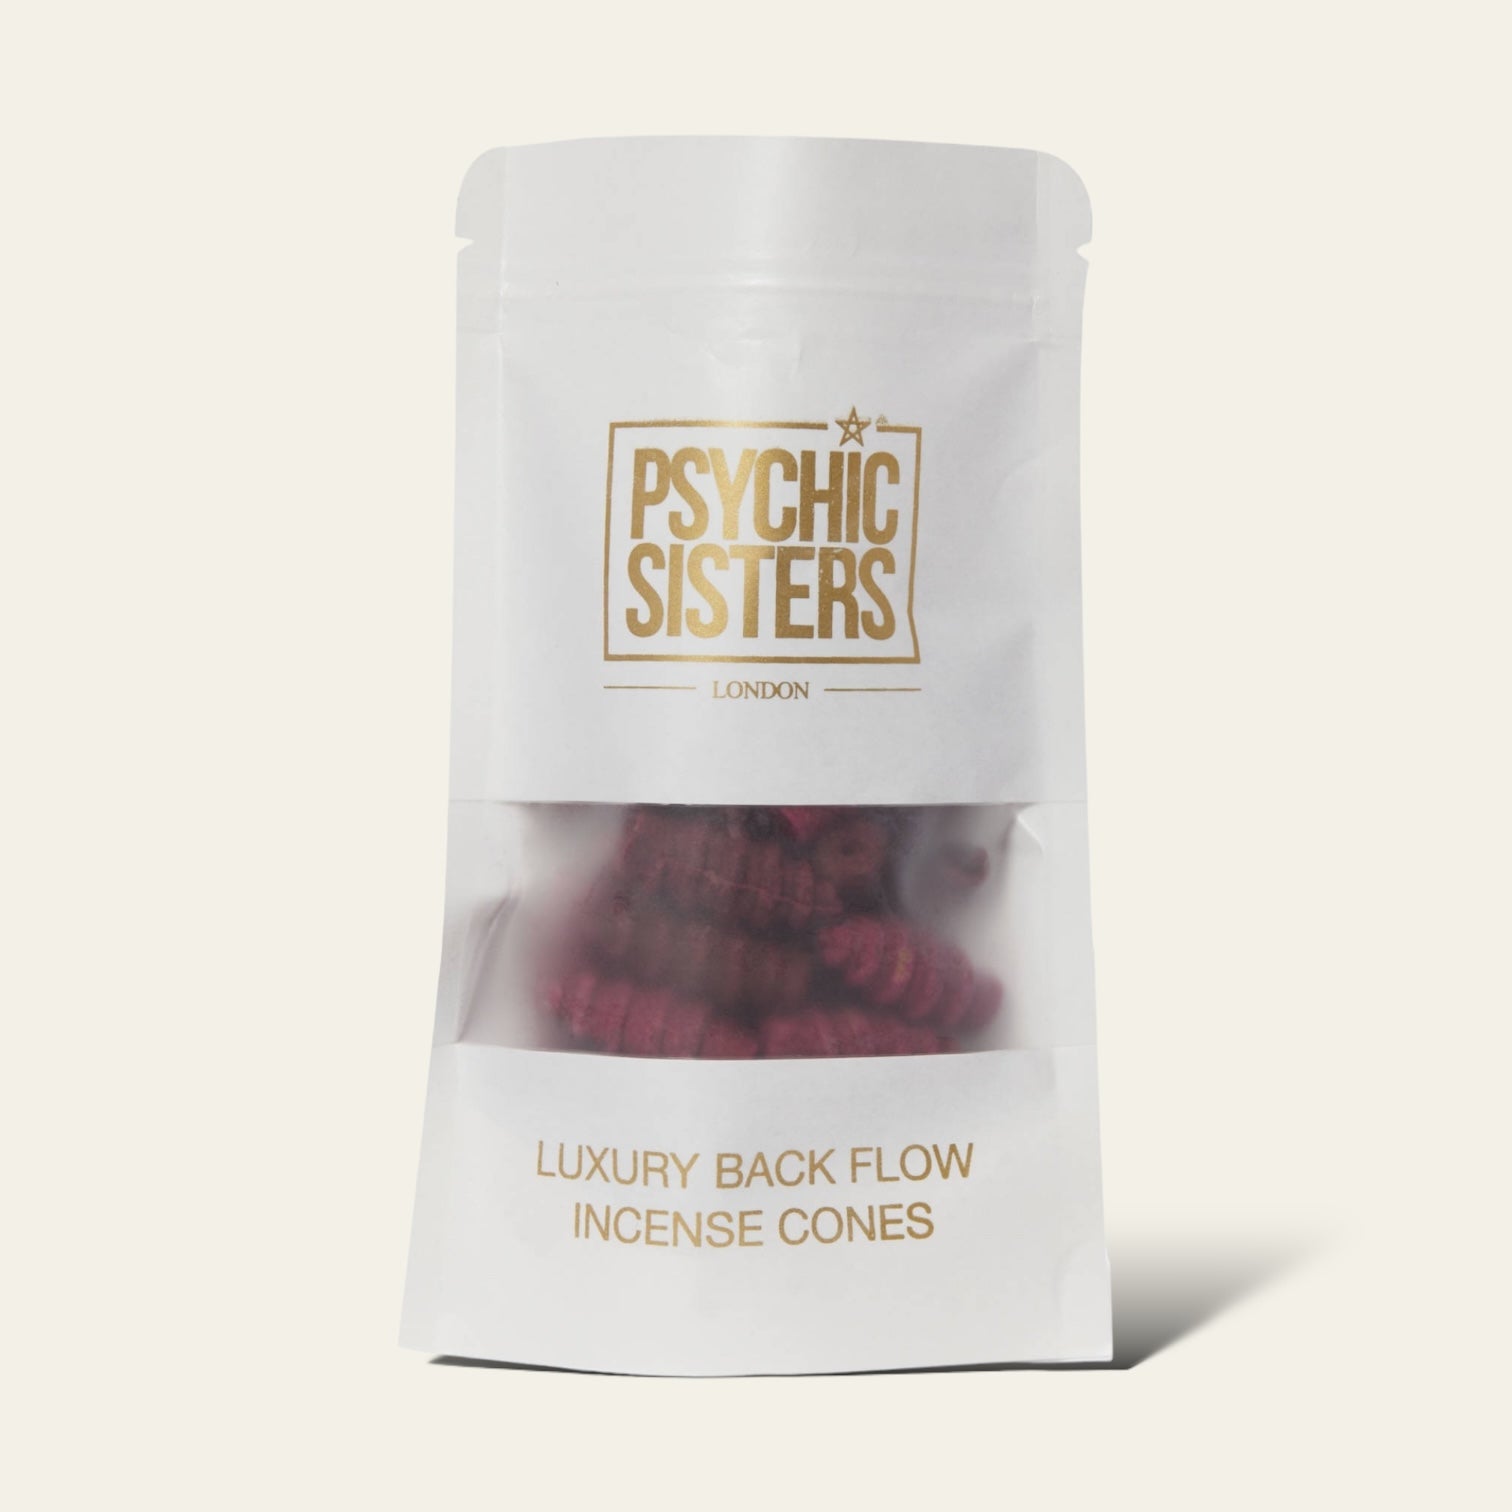  BACK FLOW INCENSE CONES - Psychic Sisters